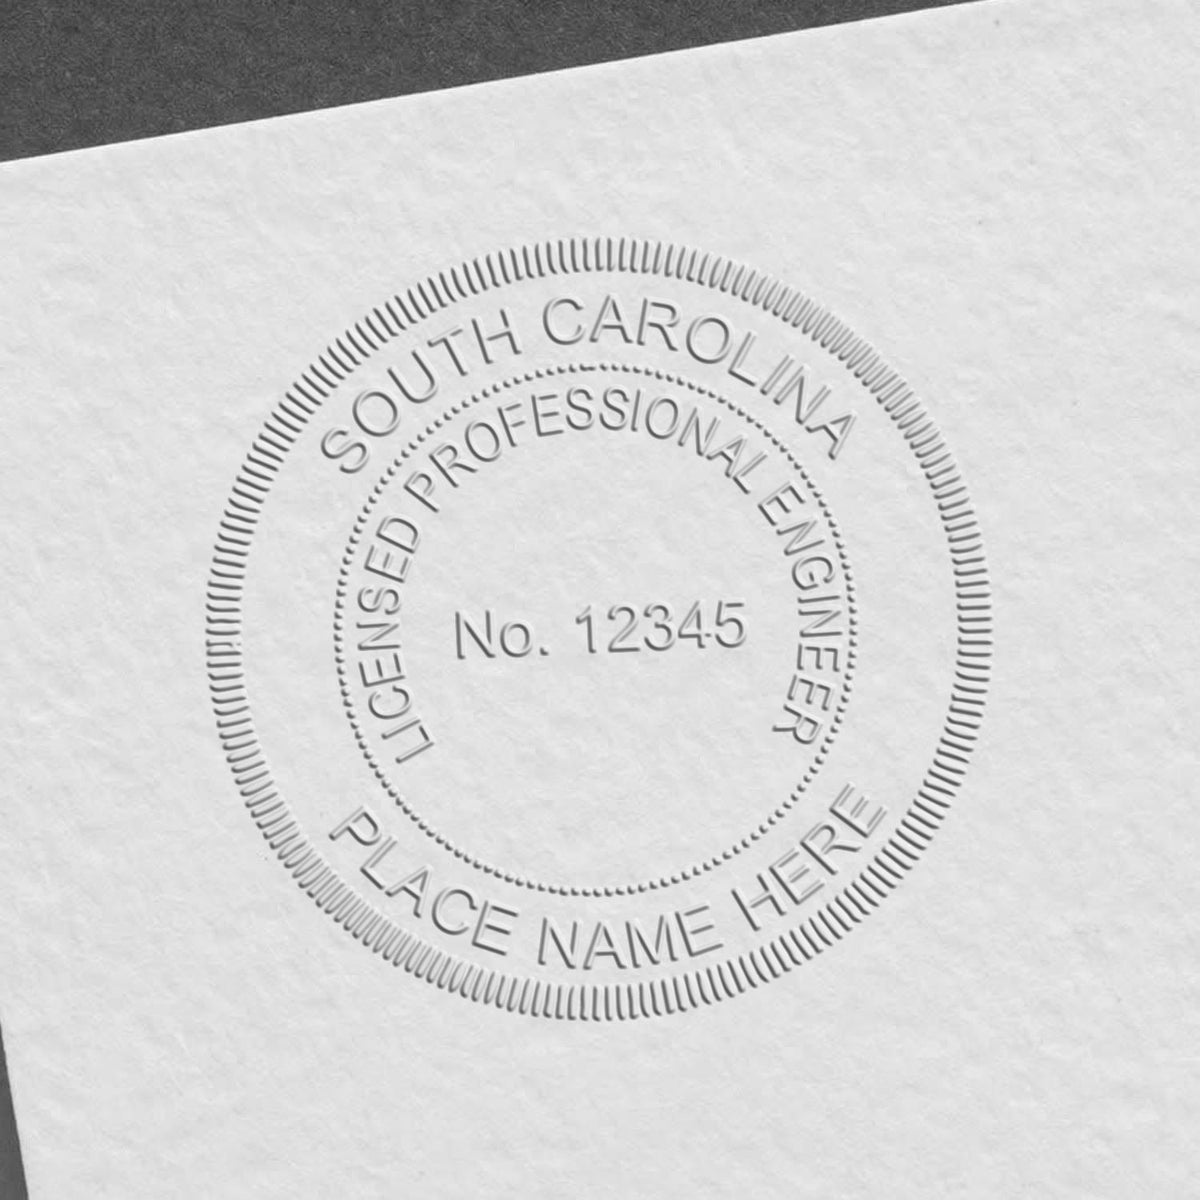 A photograph of the Long Reach South Carolina PE Seal stamp impression reveals a vivid, professional image of the on paper.